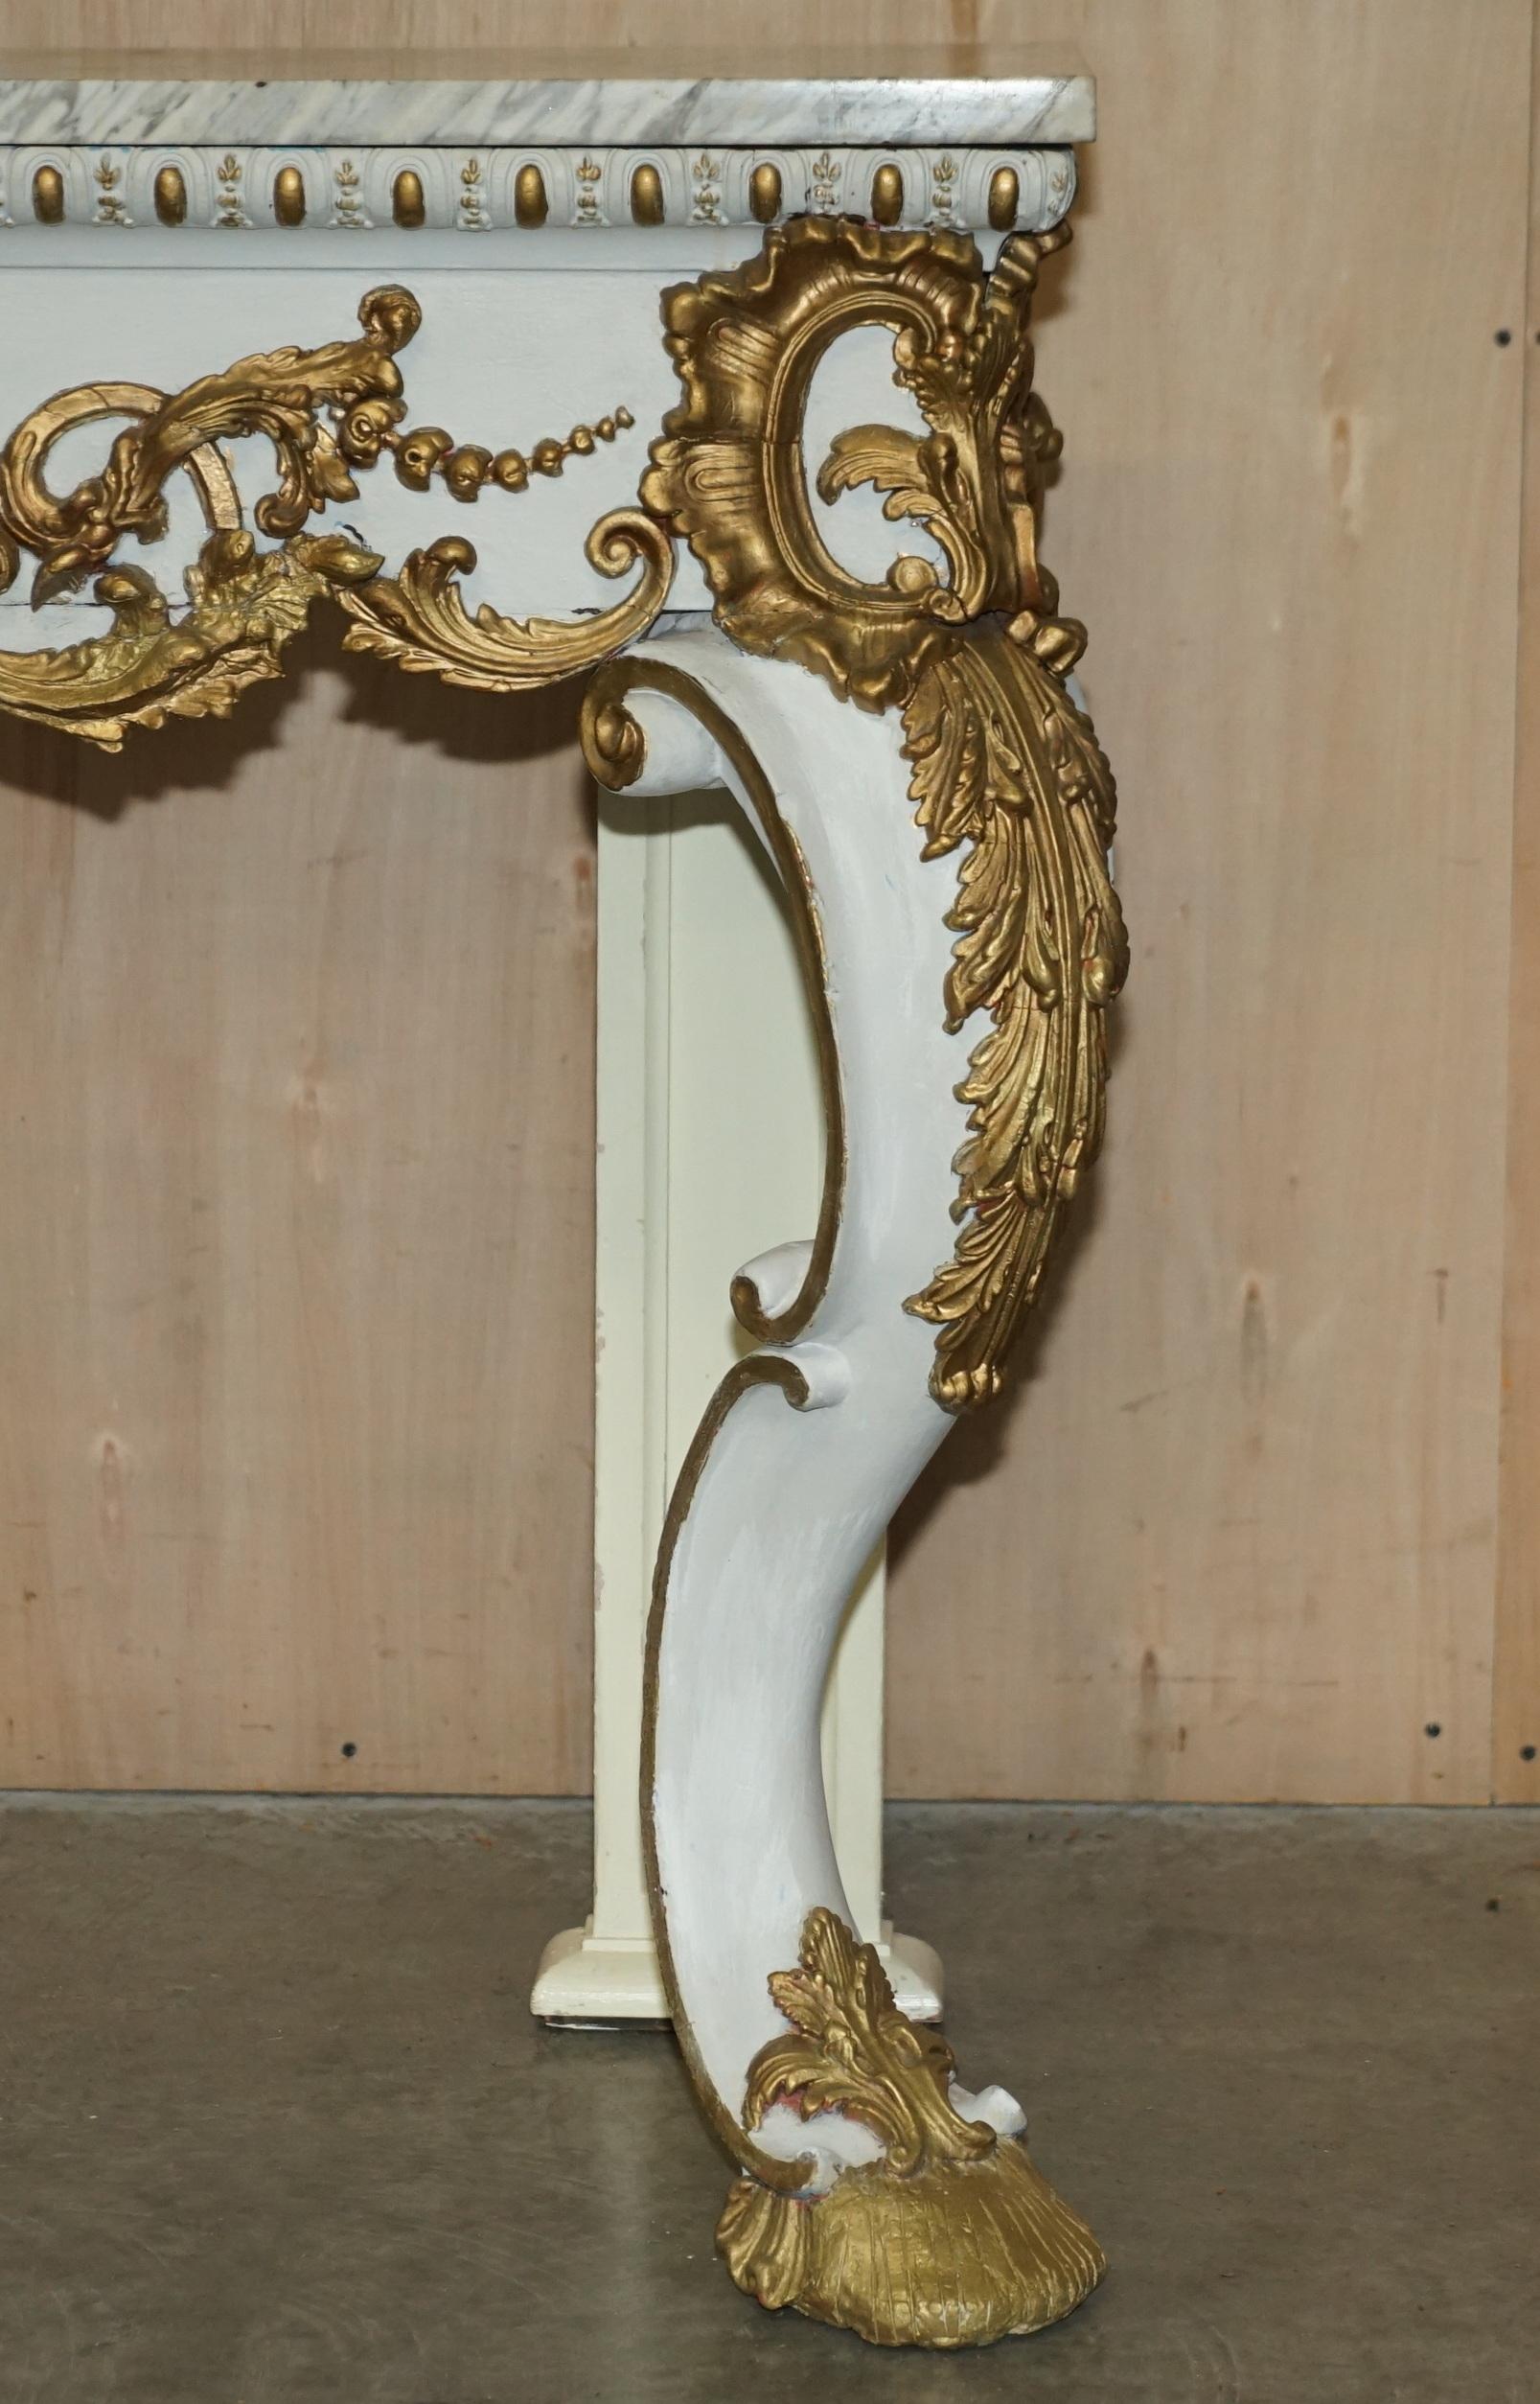 ANTIQUE ITALIAN HAND CARVED GiLTWOOD & MARBLE CONSOLE TABLE CIRCA 1860 VENICE For Sale 6